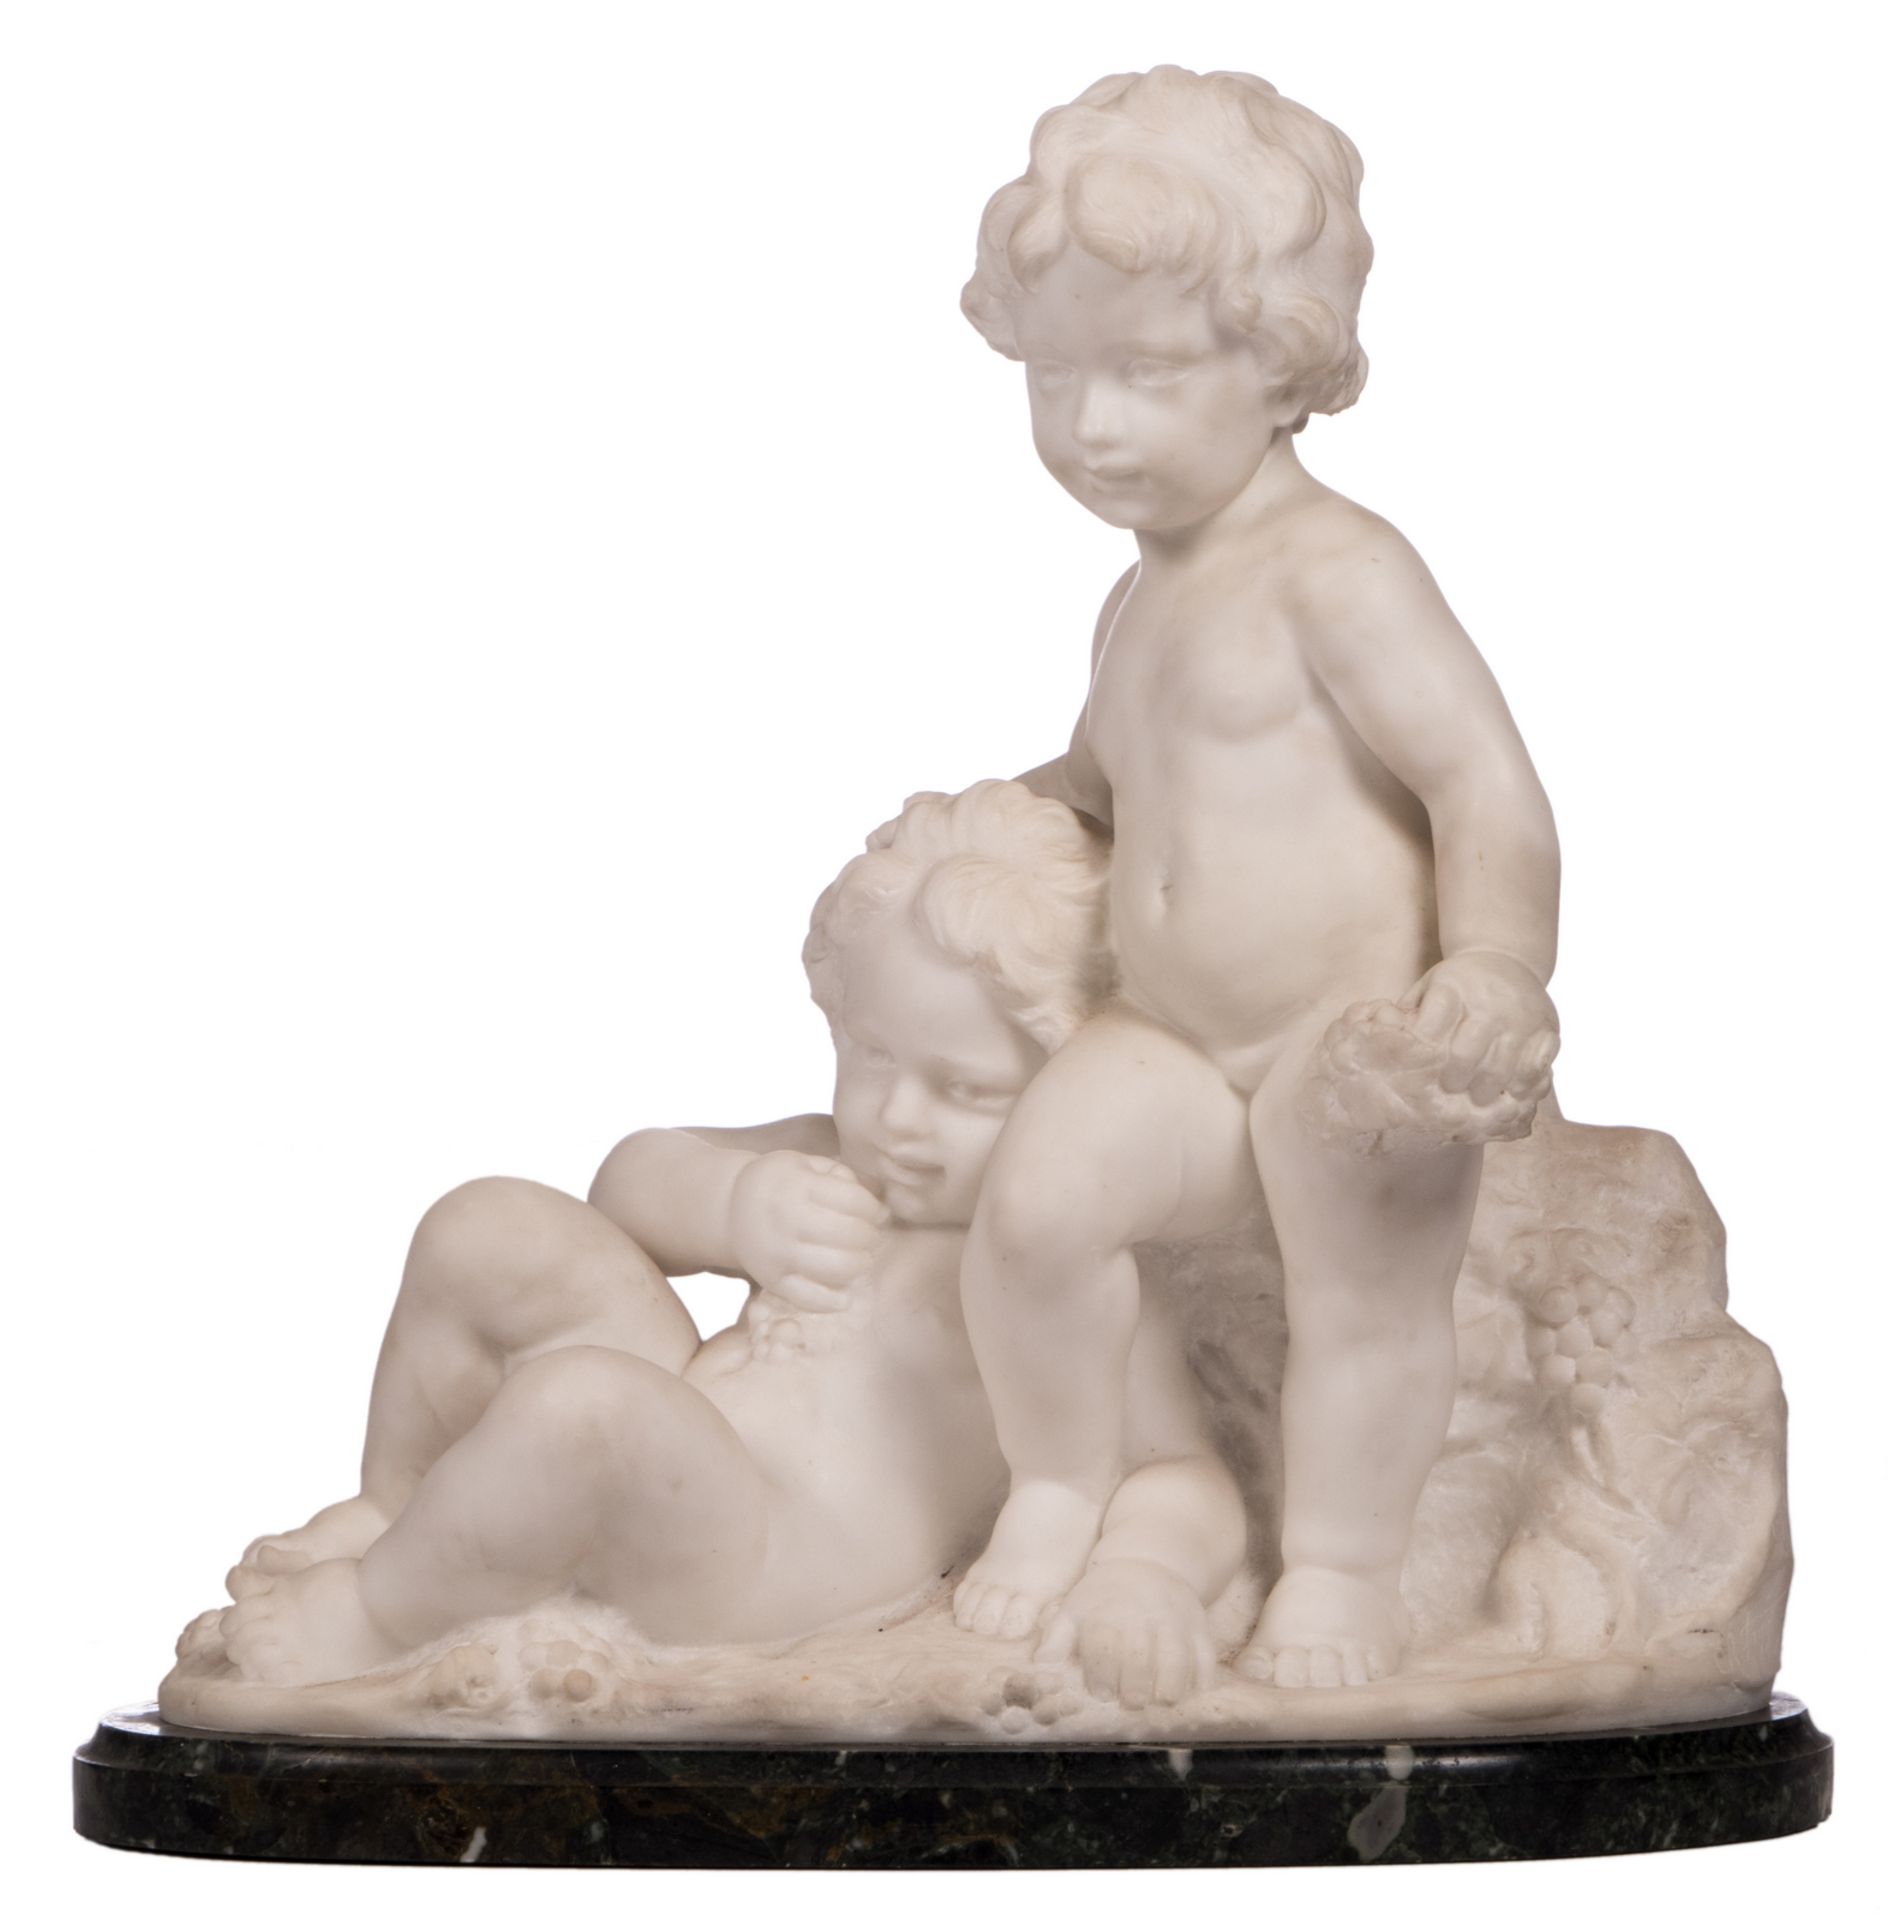 Unsigned, two young bacchants, white Carrara marble on a vert de mer marble base, H 54 - W 53 cm